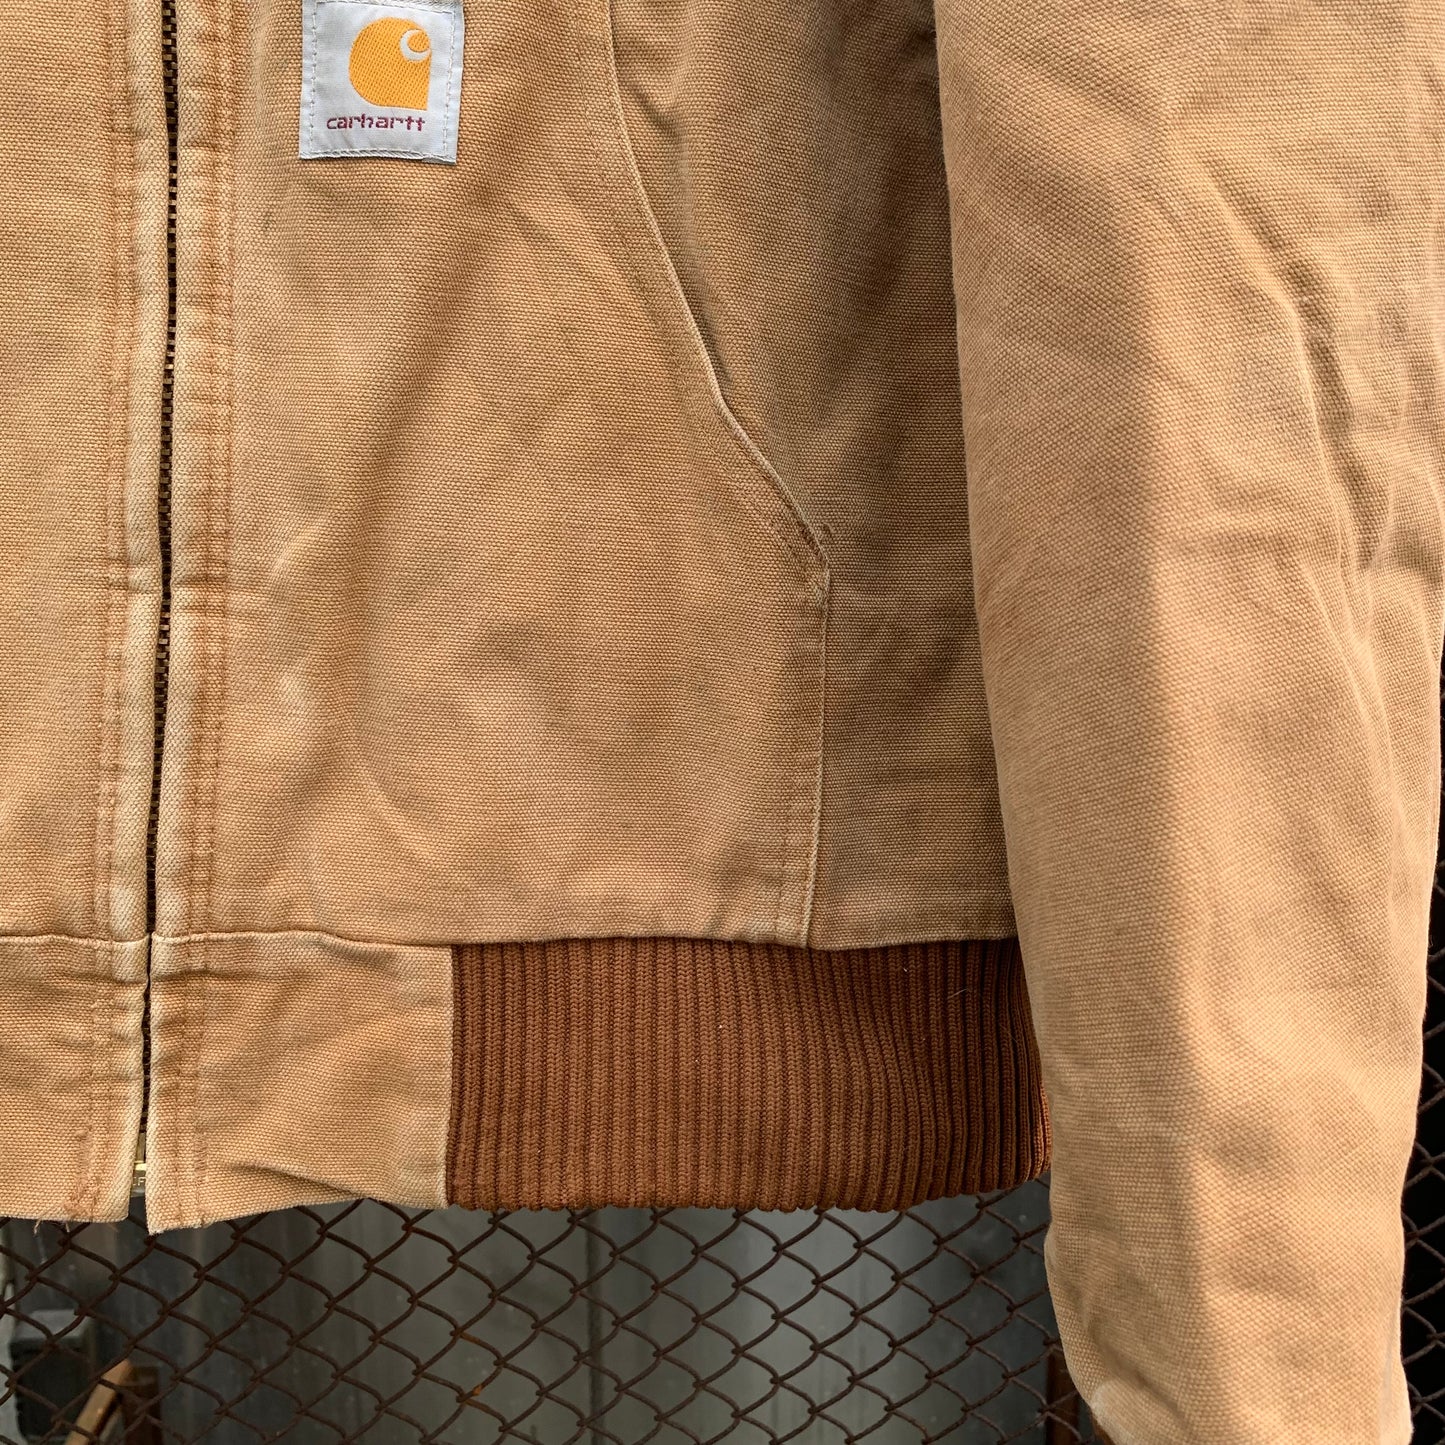 Carhartt Made in USA Brown Jacket